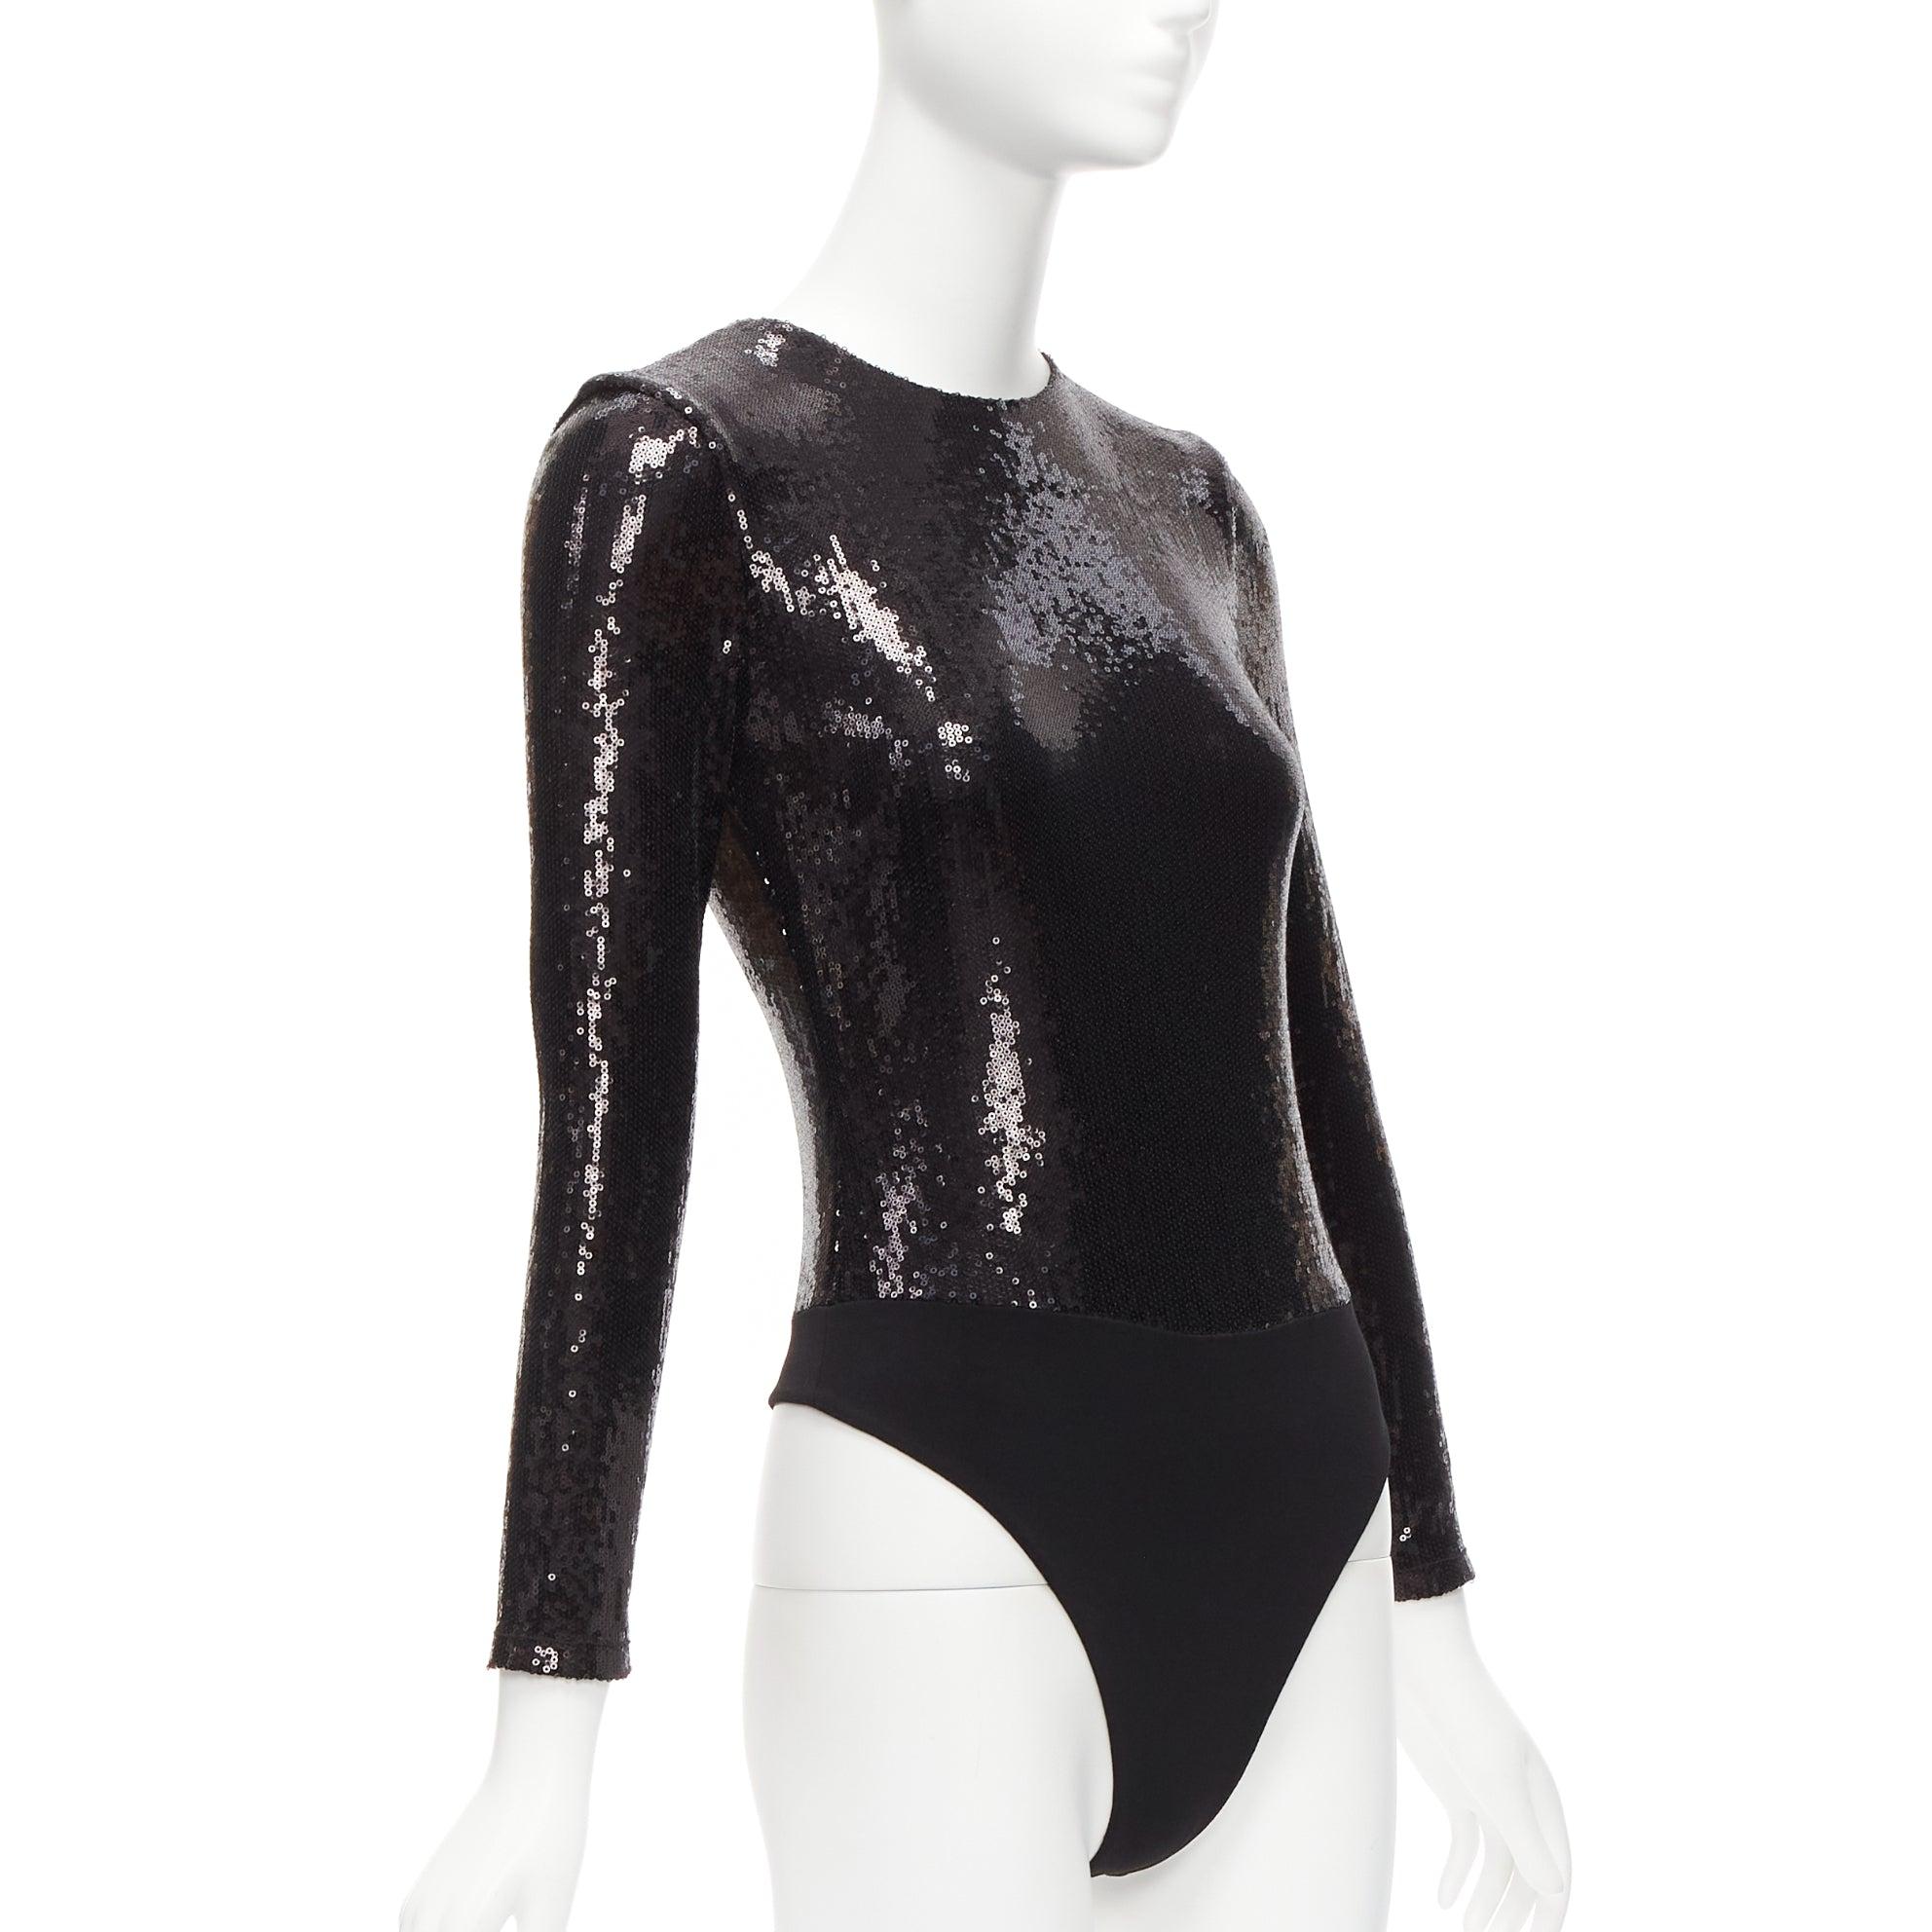 ALICE MCCALL black sequins long sleeve crew neck bodysuit top XS
Reference: AAWC/A00606
Brand: Alice McCall
Material: Viscose, Blend
Color: Black
Pattern: Solid
Closure: Zip
Lining: Black Fabric
Extra Details: Back zip. No button opening at